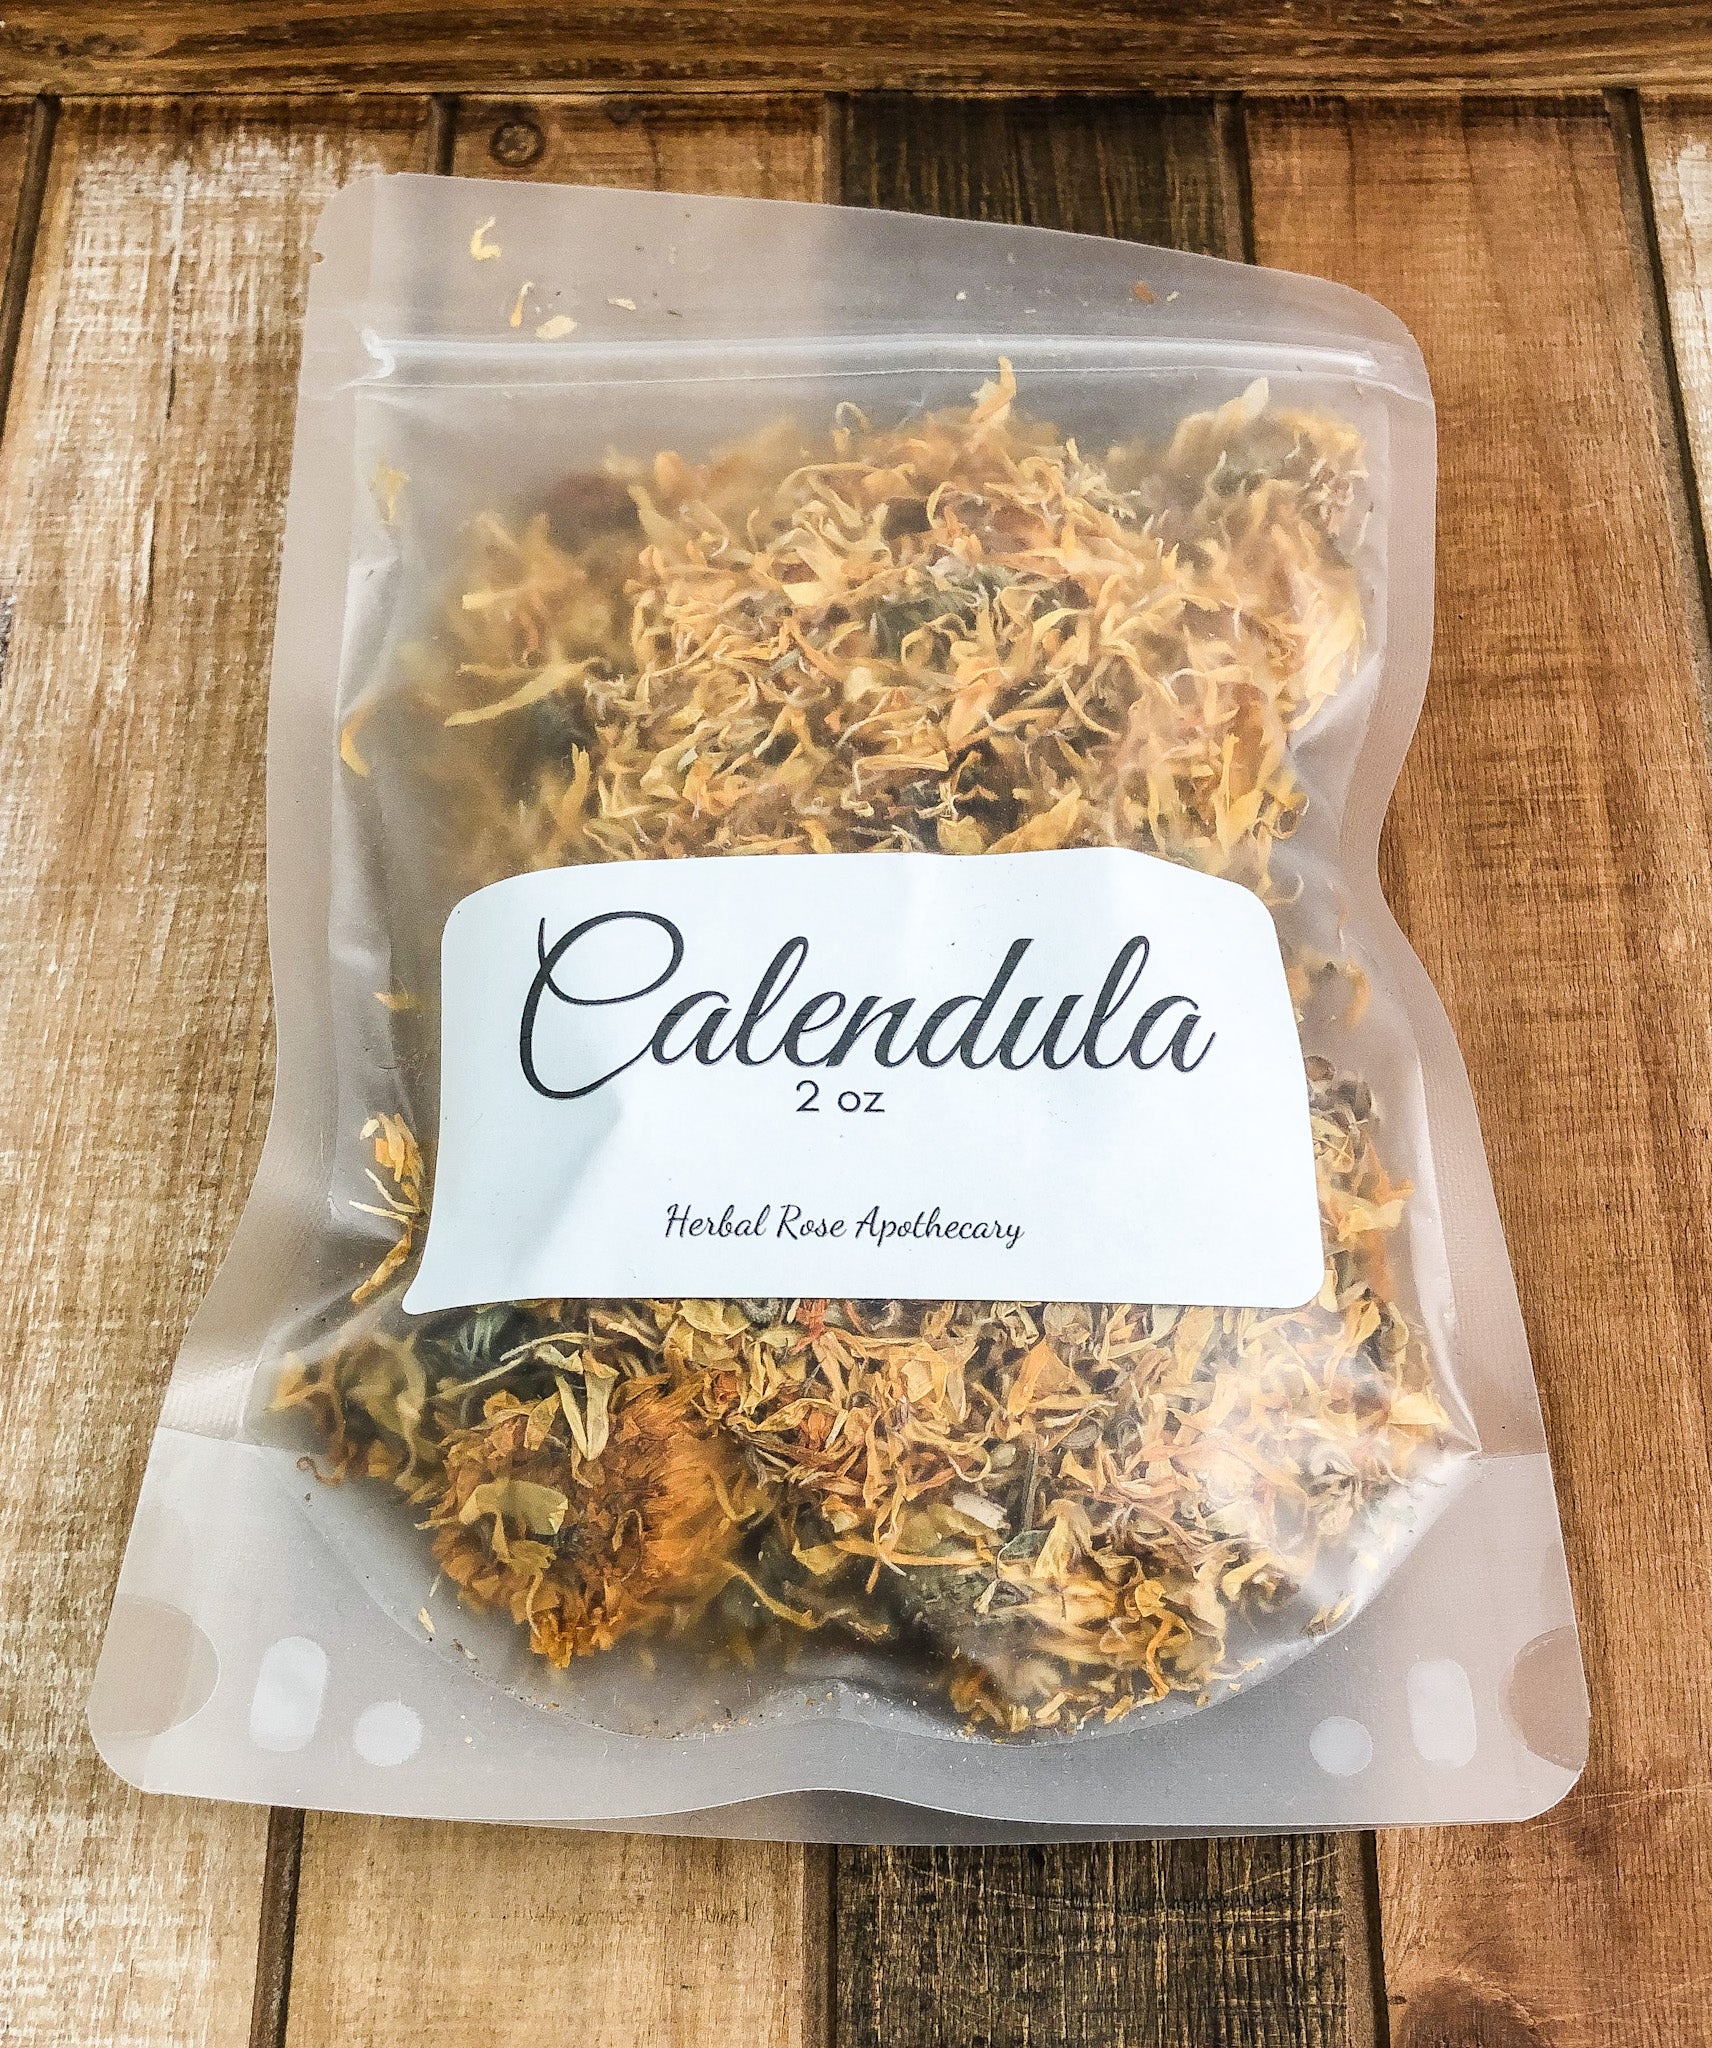 2oz dried calendula flowers in a clear plastic bag with a wooden background